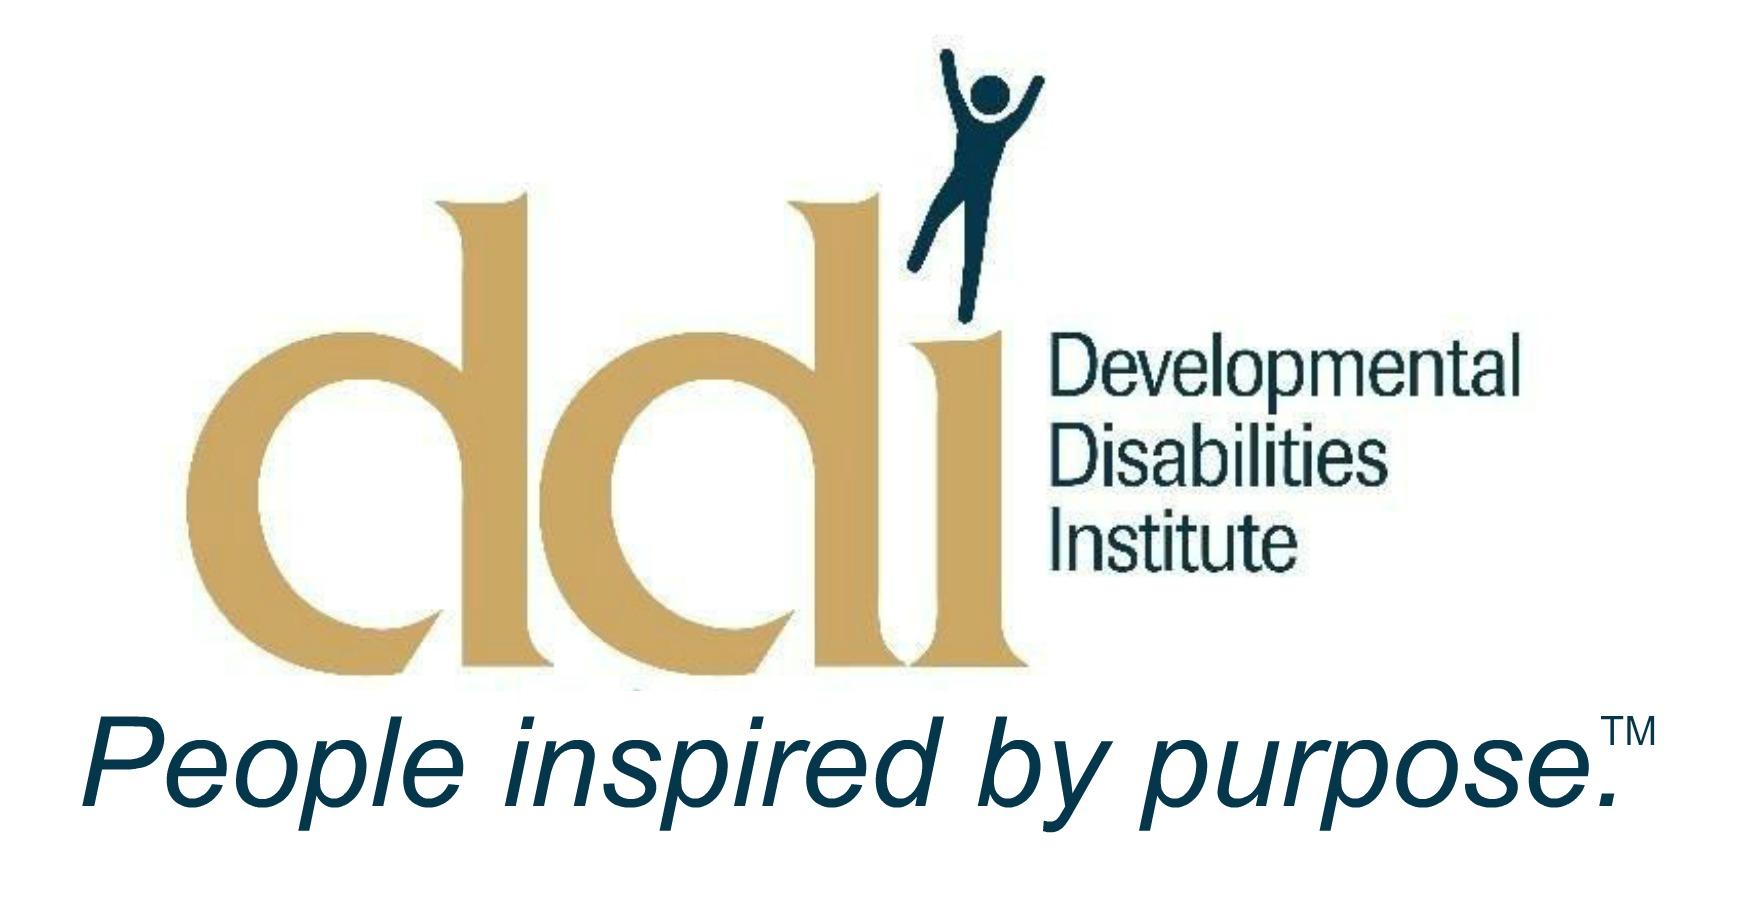 DDI's People inspired by purpose logo